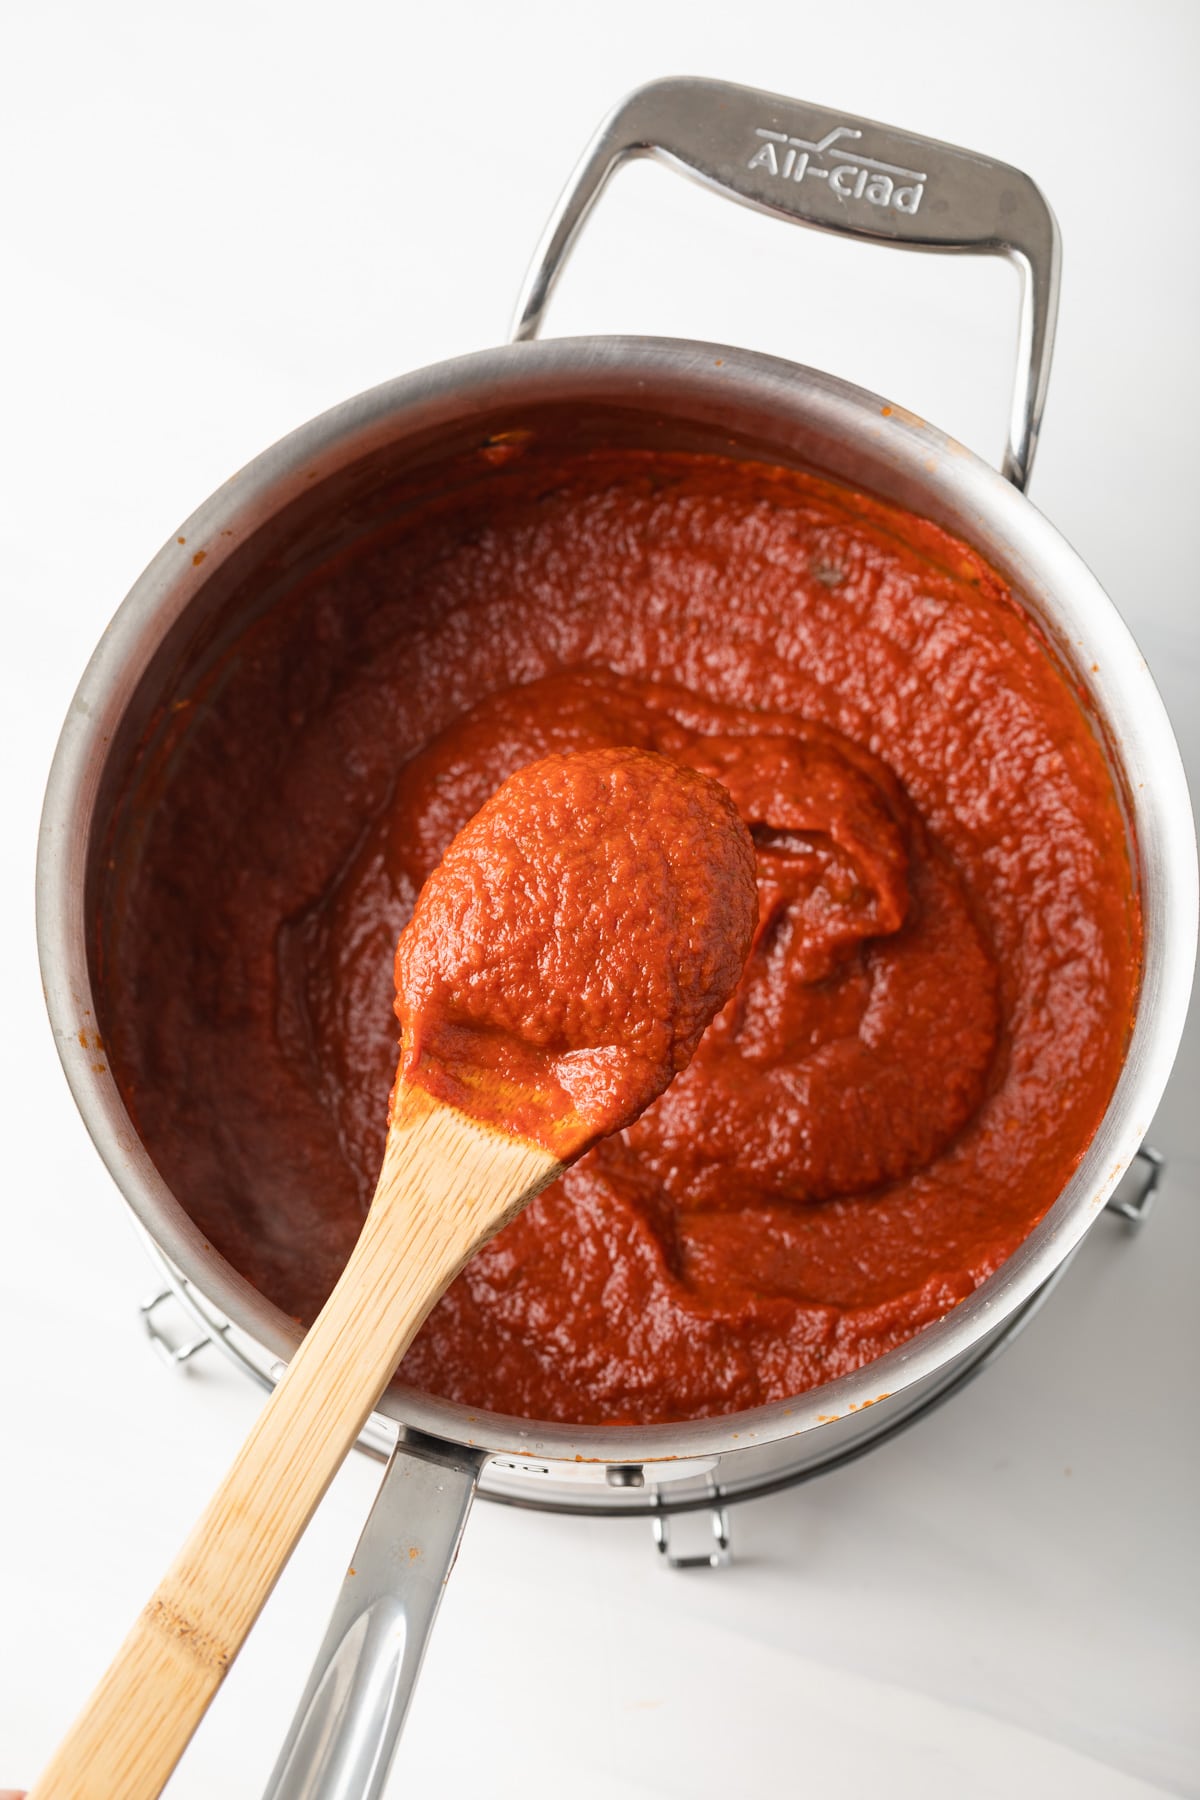 Pomodoro sauce in a saucepan with wooden spoon.